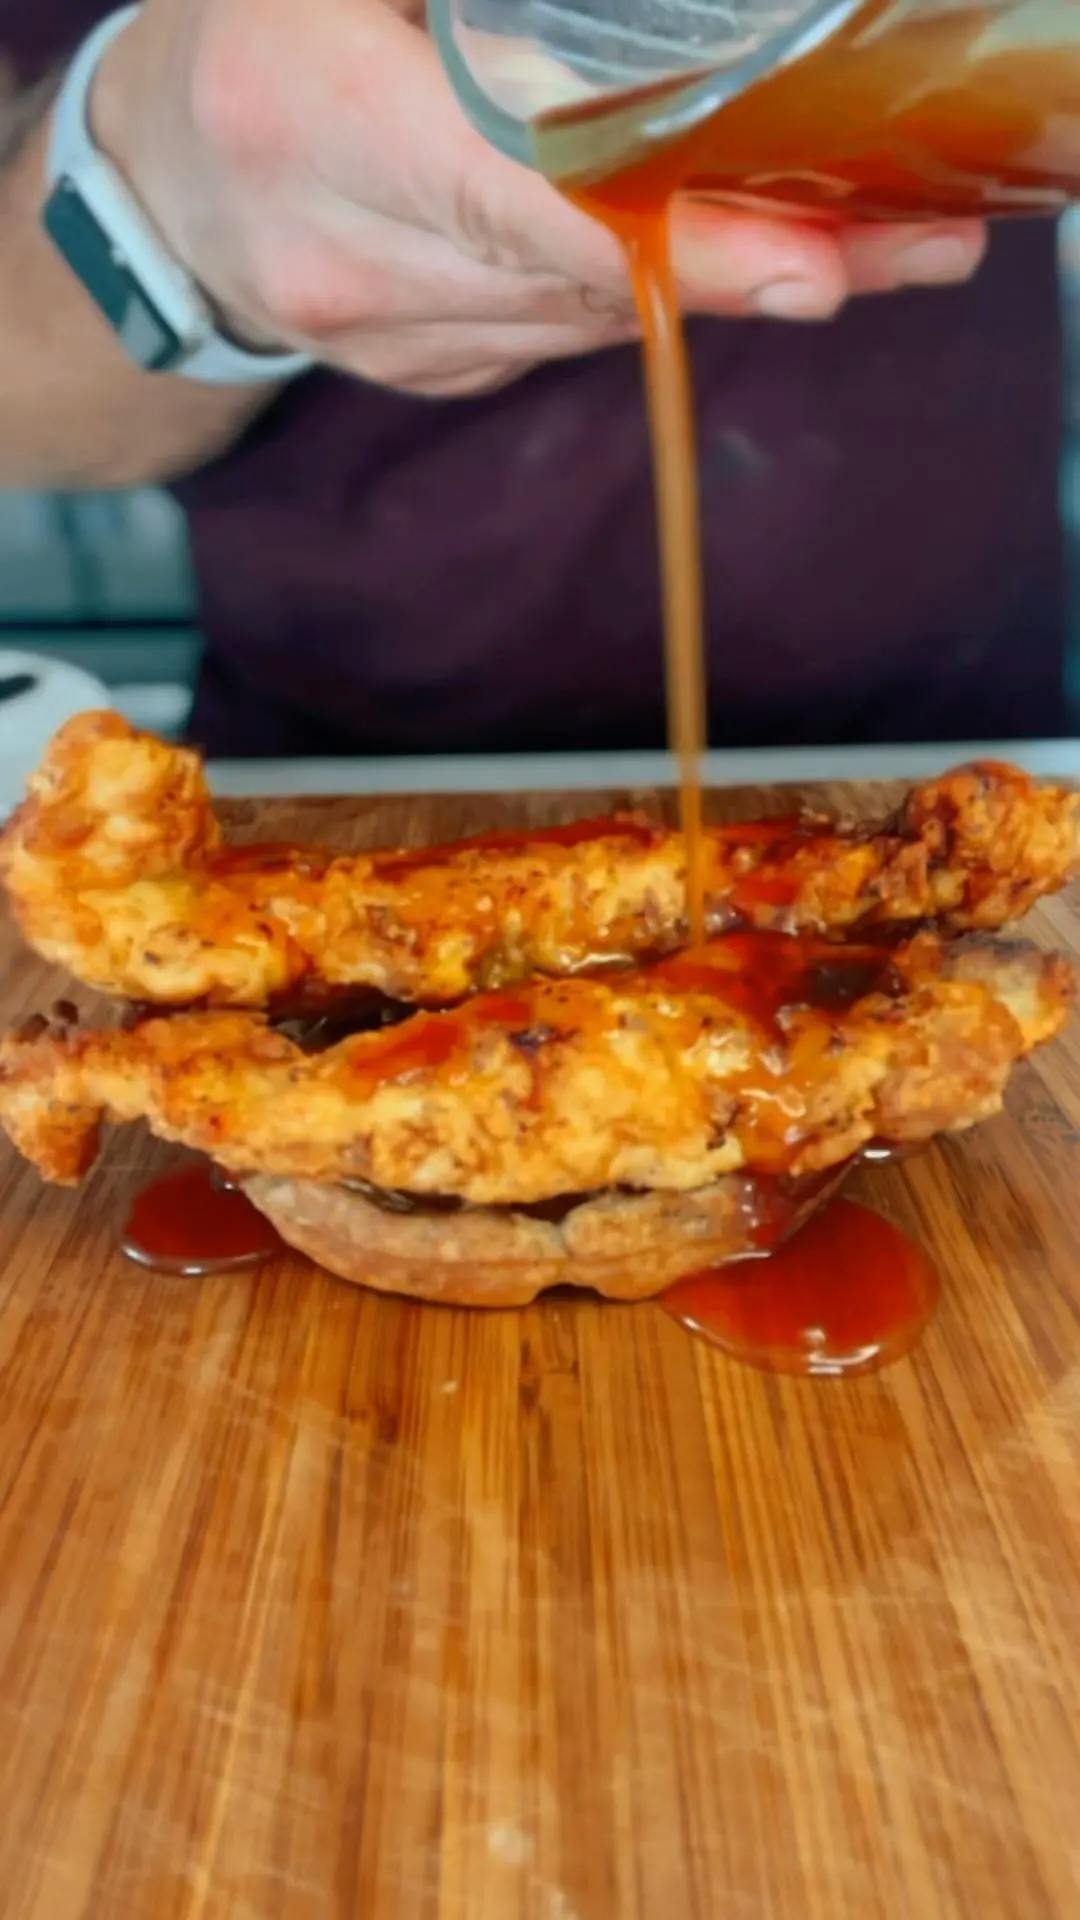 Picture for Chicken + Waffle Sandwich with Spicy Maple Butter Sauce